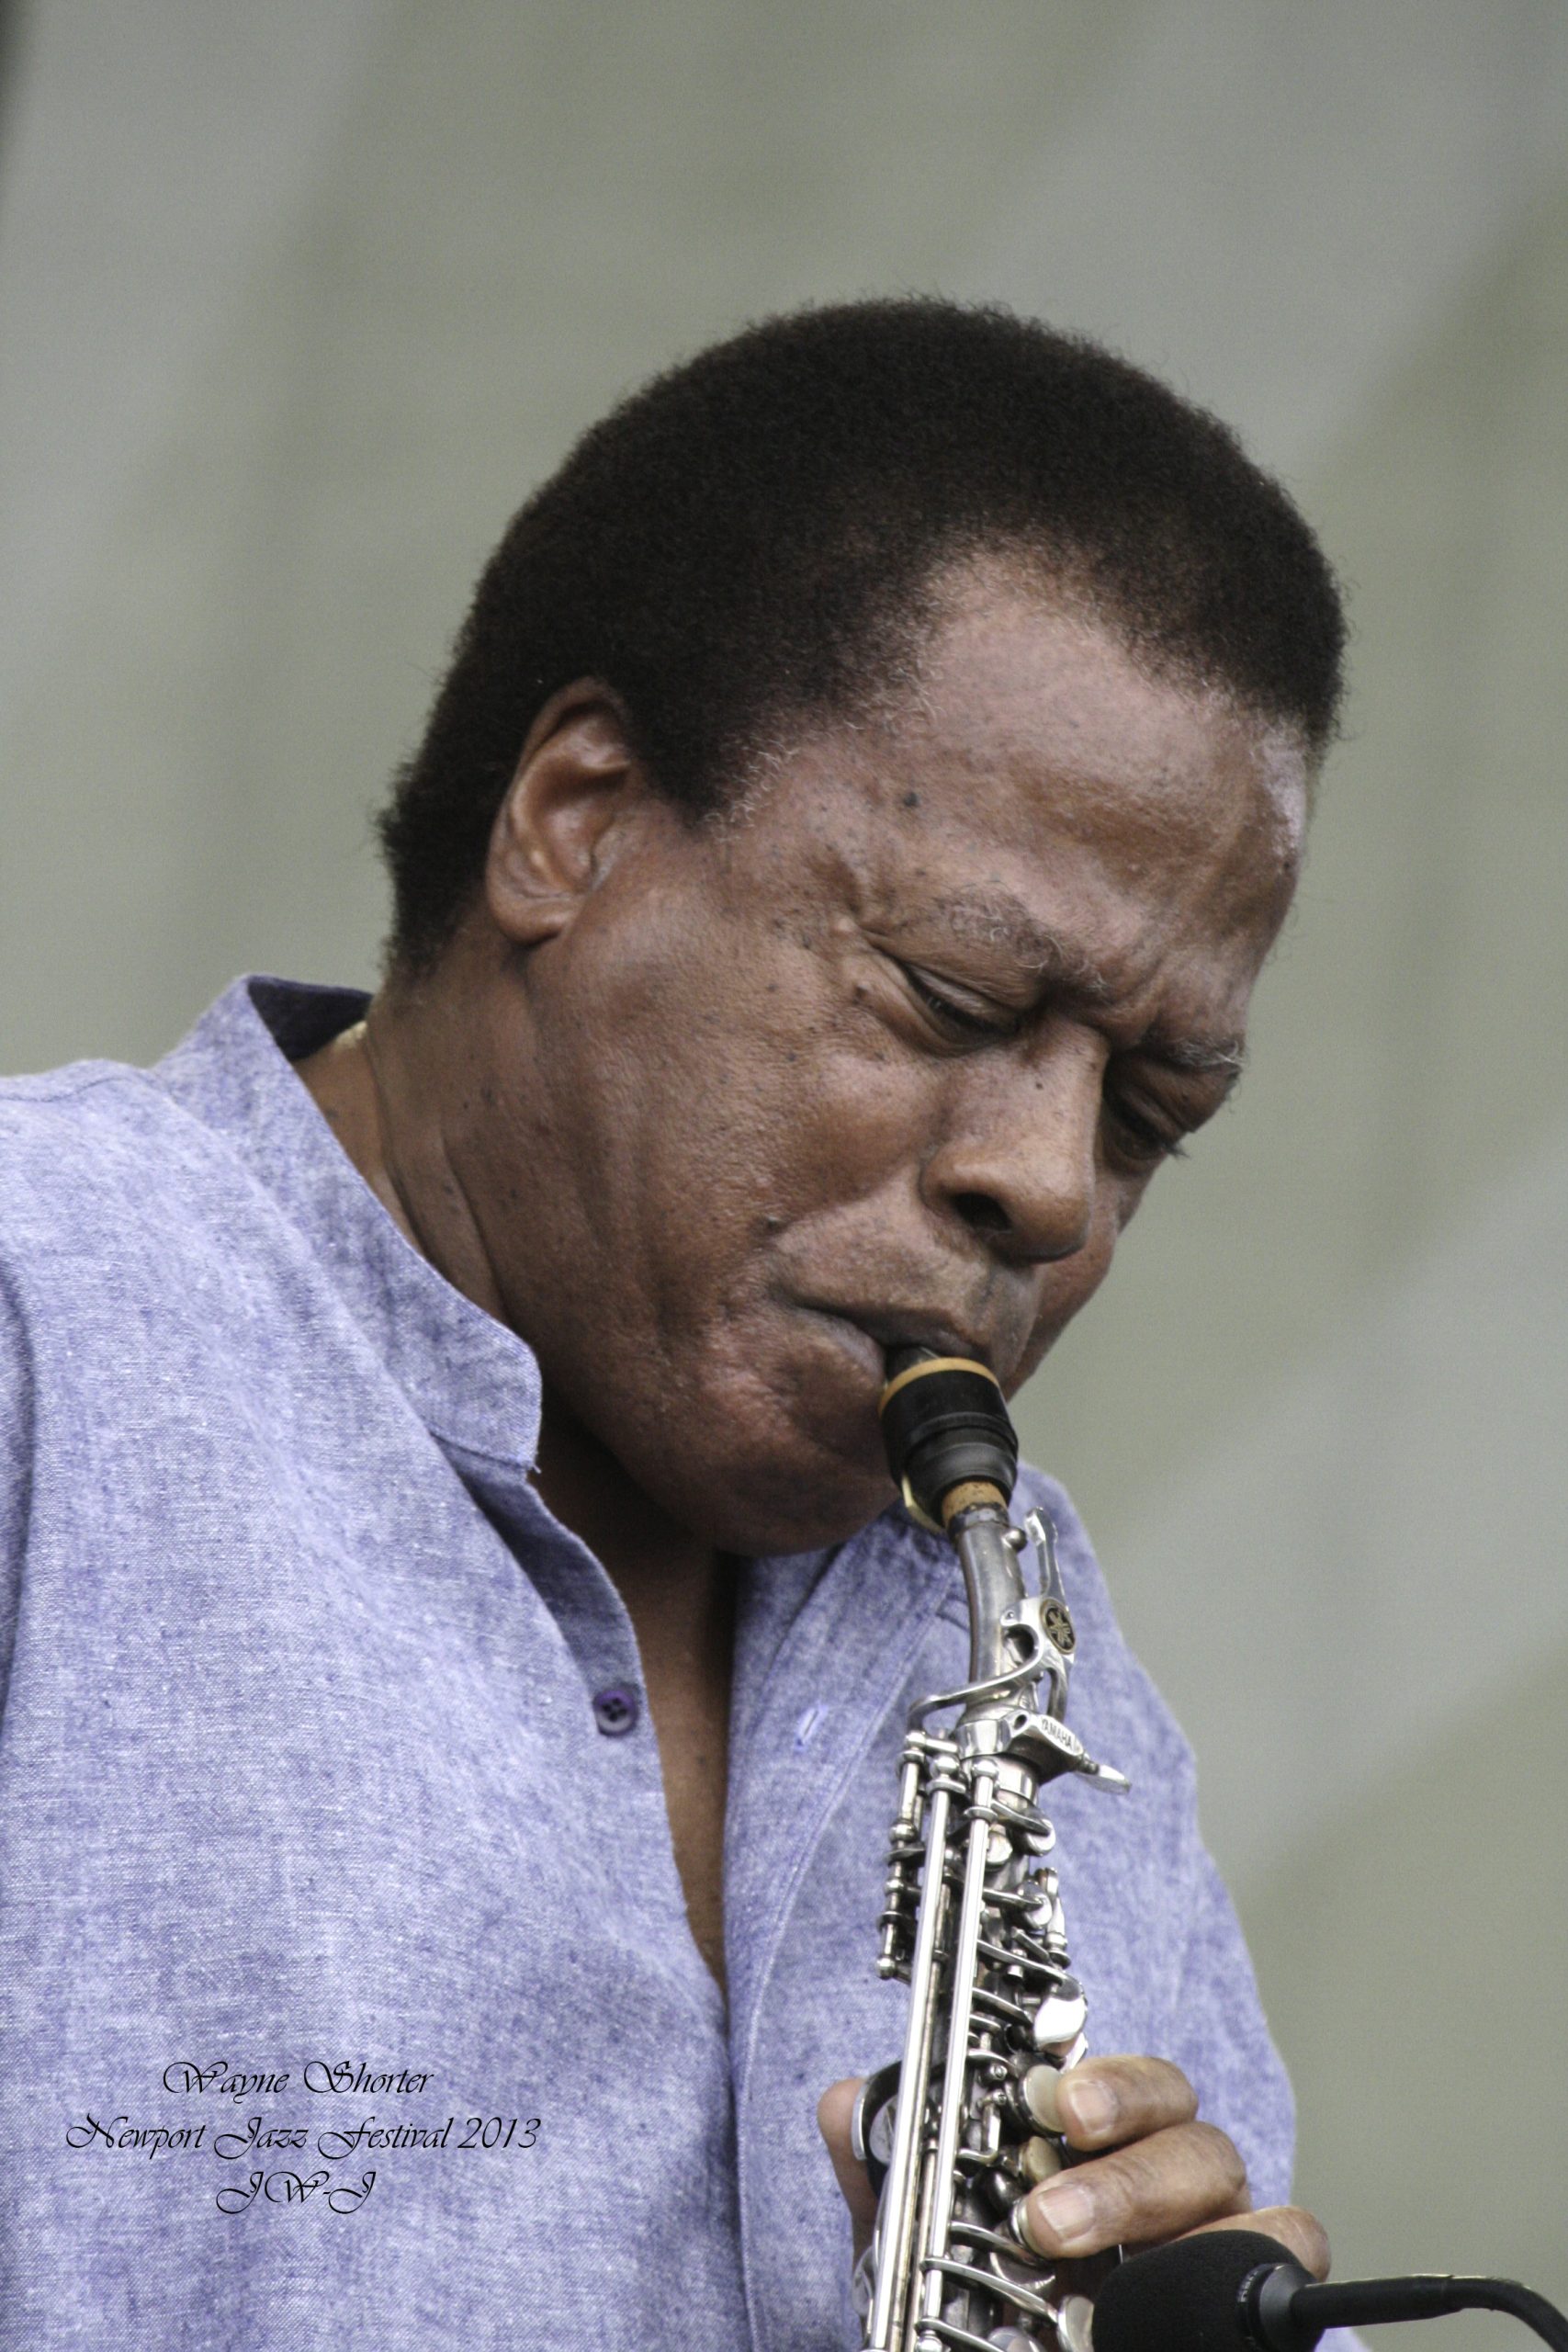 Full color image of Wayne Shorter playing soprano saxophone on stage at Newport Jazz Festival